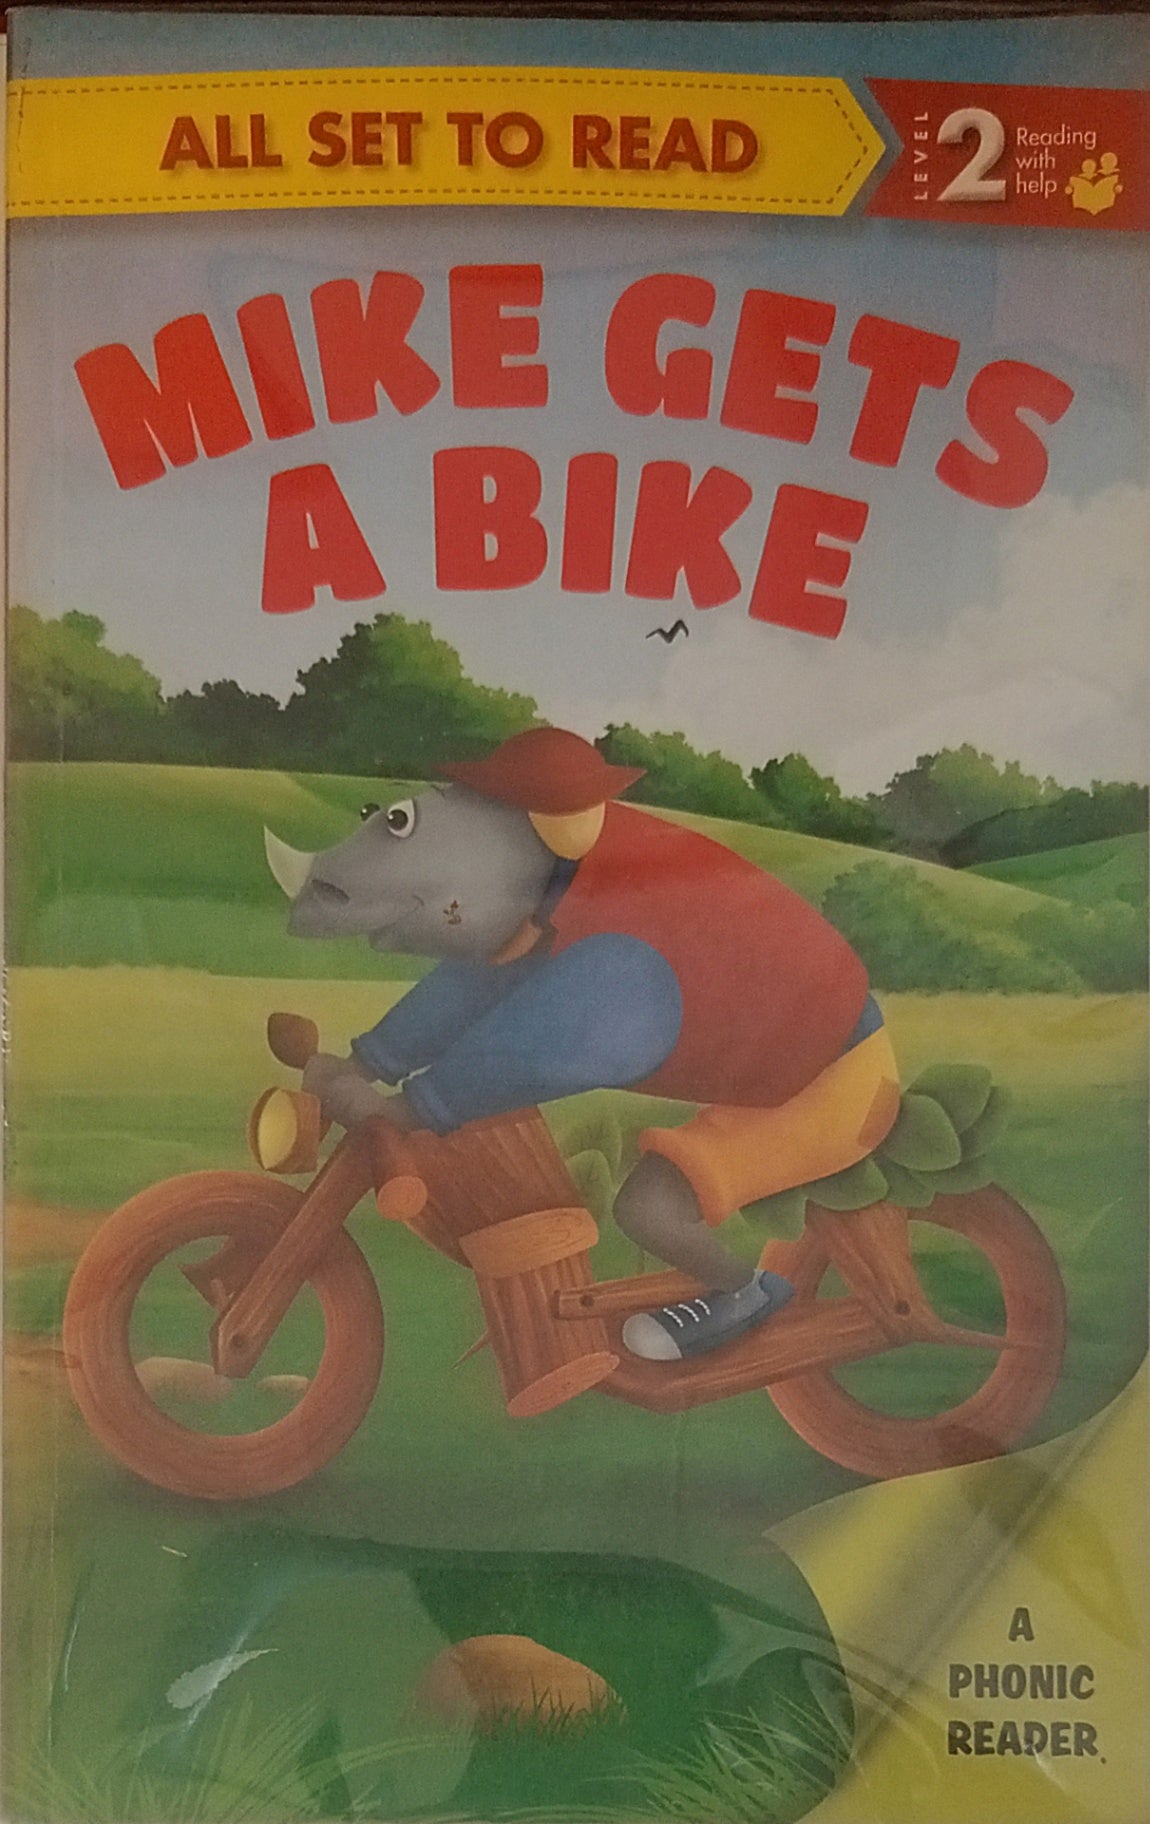 All Set to Read - Mike Gets A Bike